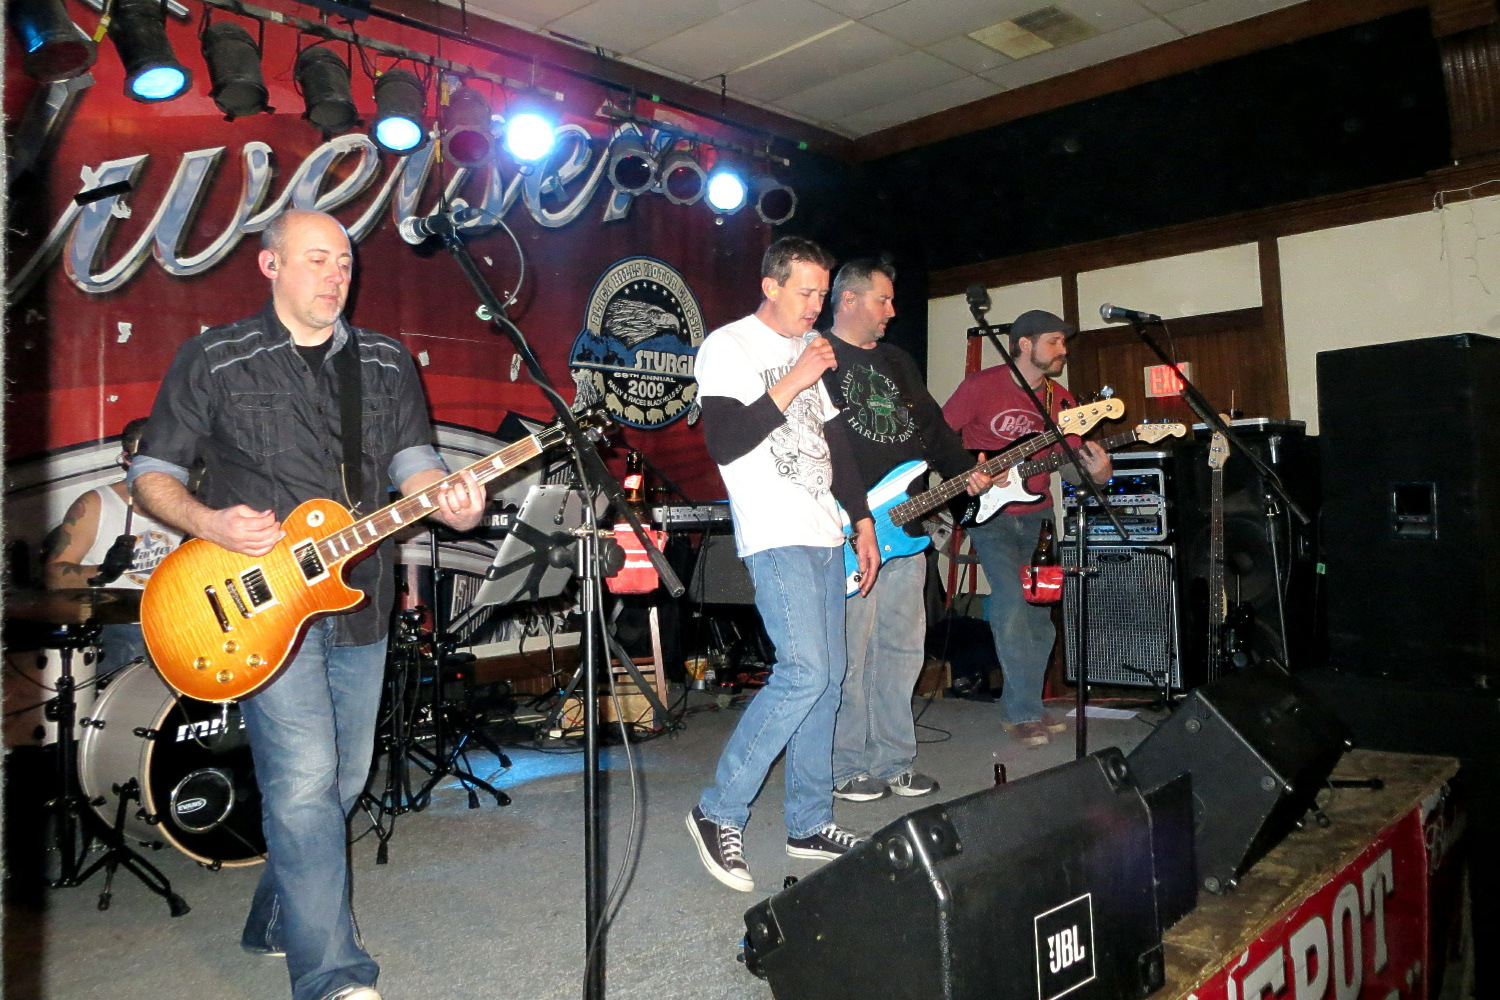 Live Music at The Huddle Lounge in South Sioux City, Nebraska  - 
						Nebraska Band Mr. Hand   
						performing live at  
						The Huddle Lounge in South Sioux City, Nebraska 
						on Saturday, December 12, 2015. 
						The Huddle Lounge is located at 
						110 E 8th Street, 
						South Sioux City, NE 68776, 
						Phone: (402) 494-5903.